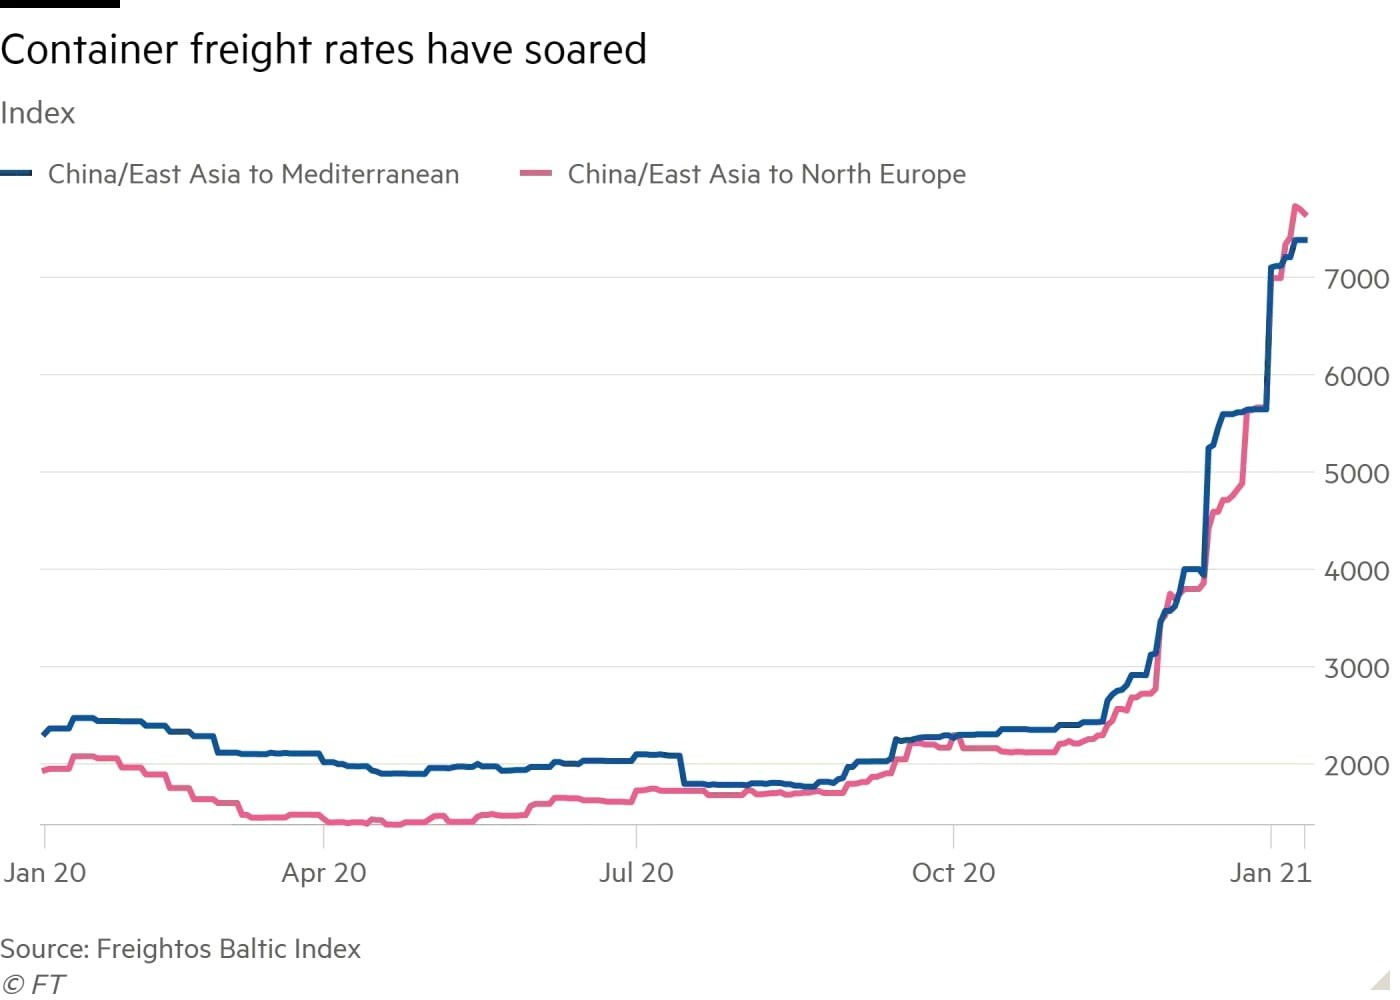 Graph showing huge increase in container freight rates from China to Europe - peaking at 7000.